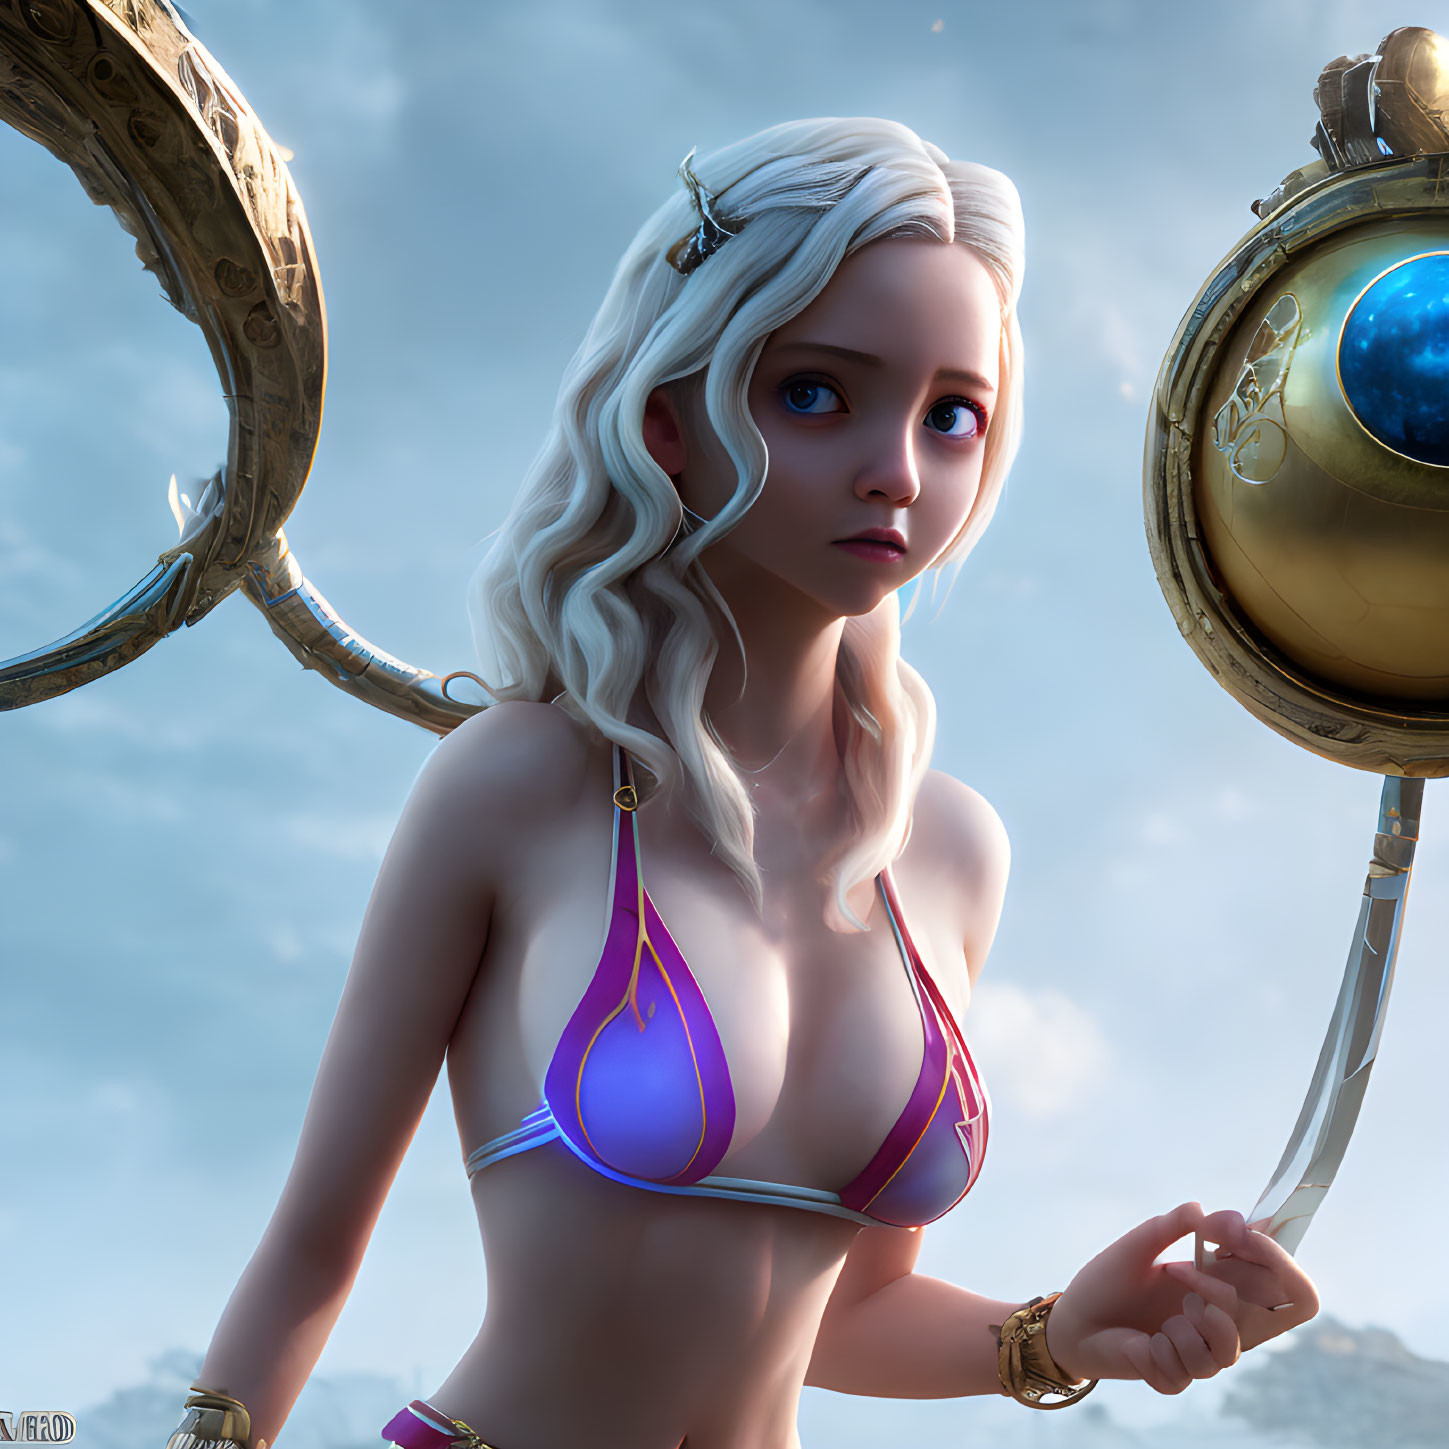 Fantasy-themed digital art of female character with white hair and glowing orb